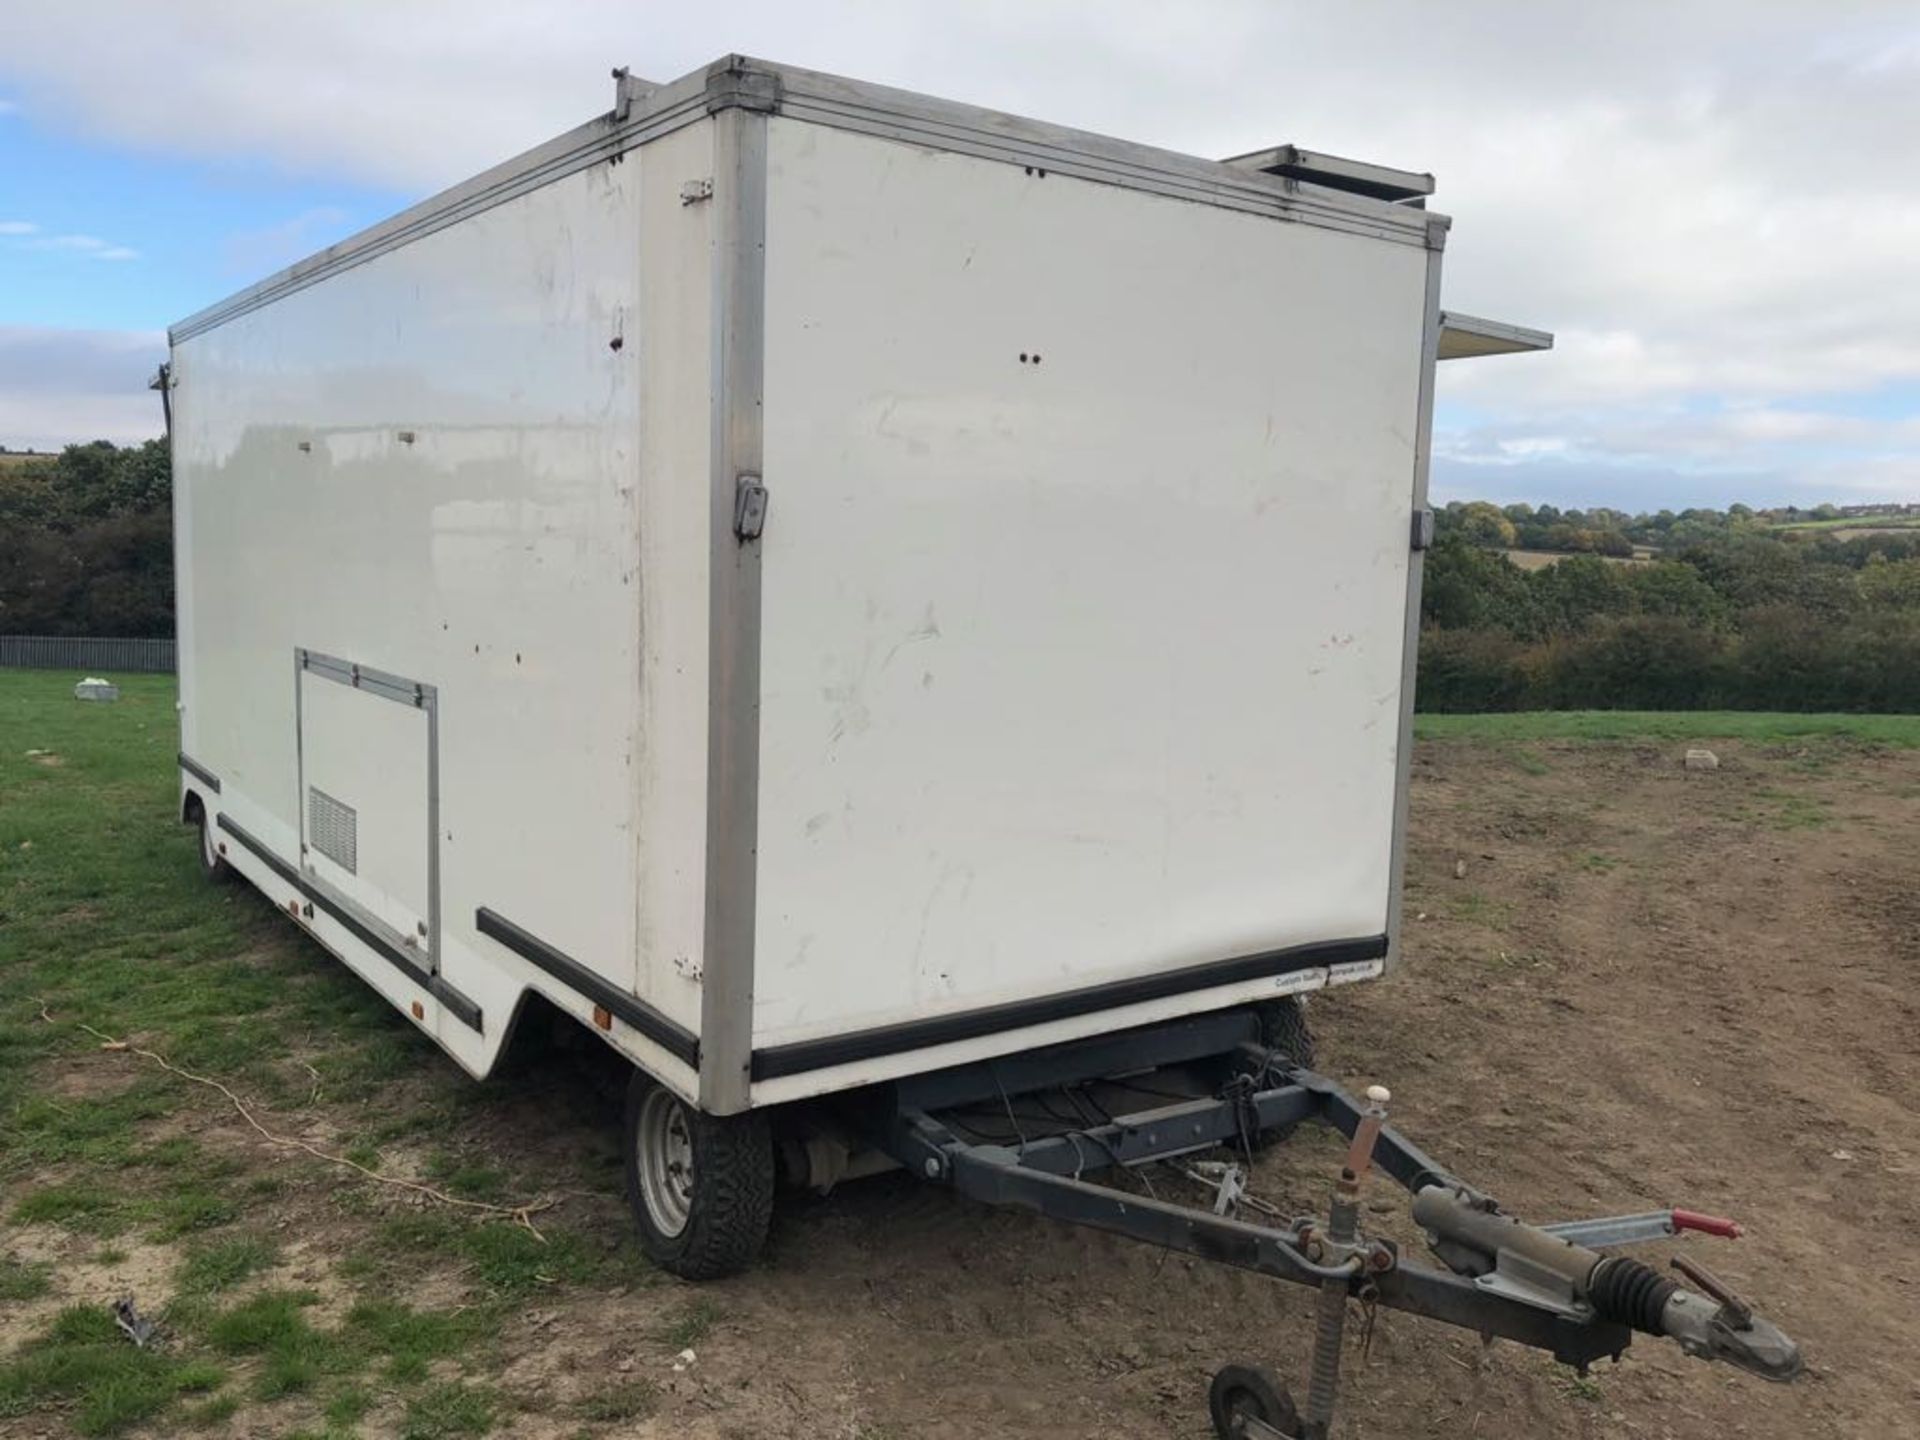 MOBILE OFFICE / EXHIBITION TRAILER C/W RAMPS, STEPS, GENERATOR, MAINS ELECTRIC HOOK UP, KITCHEN ETC - Image 3 of 12